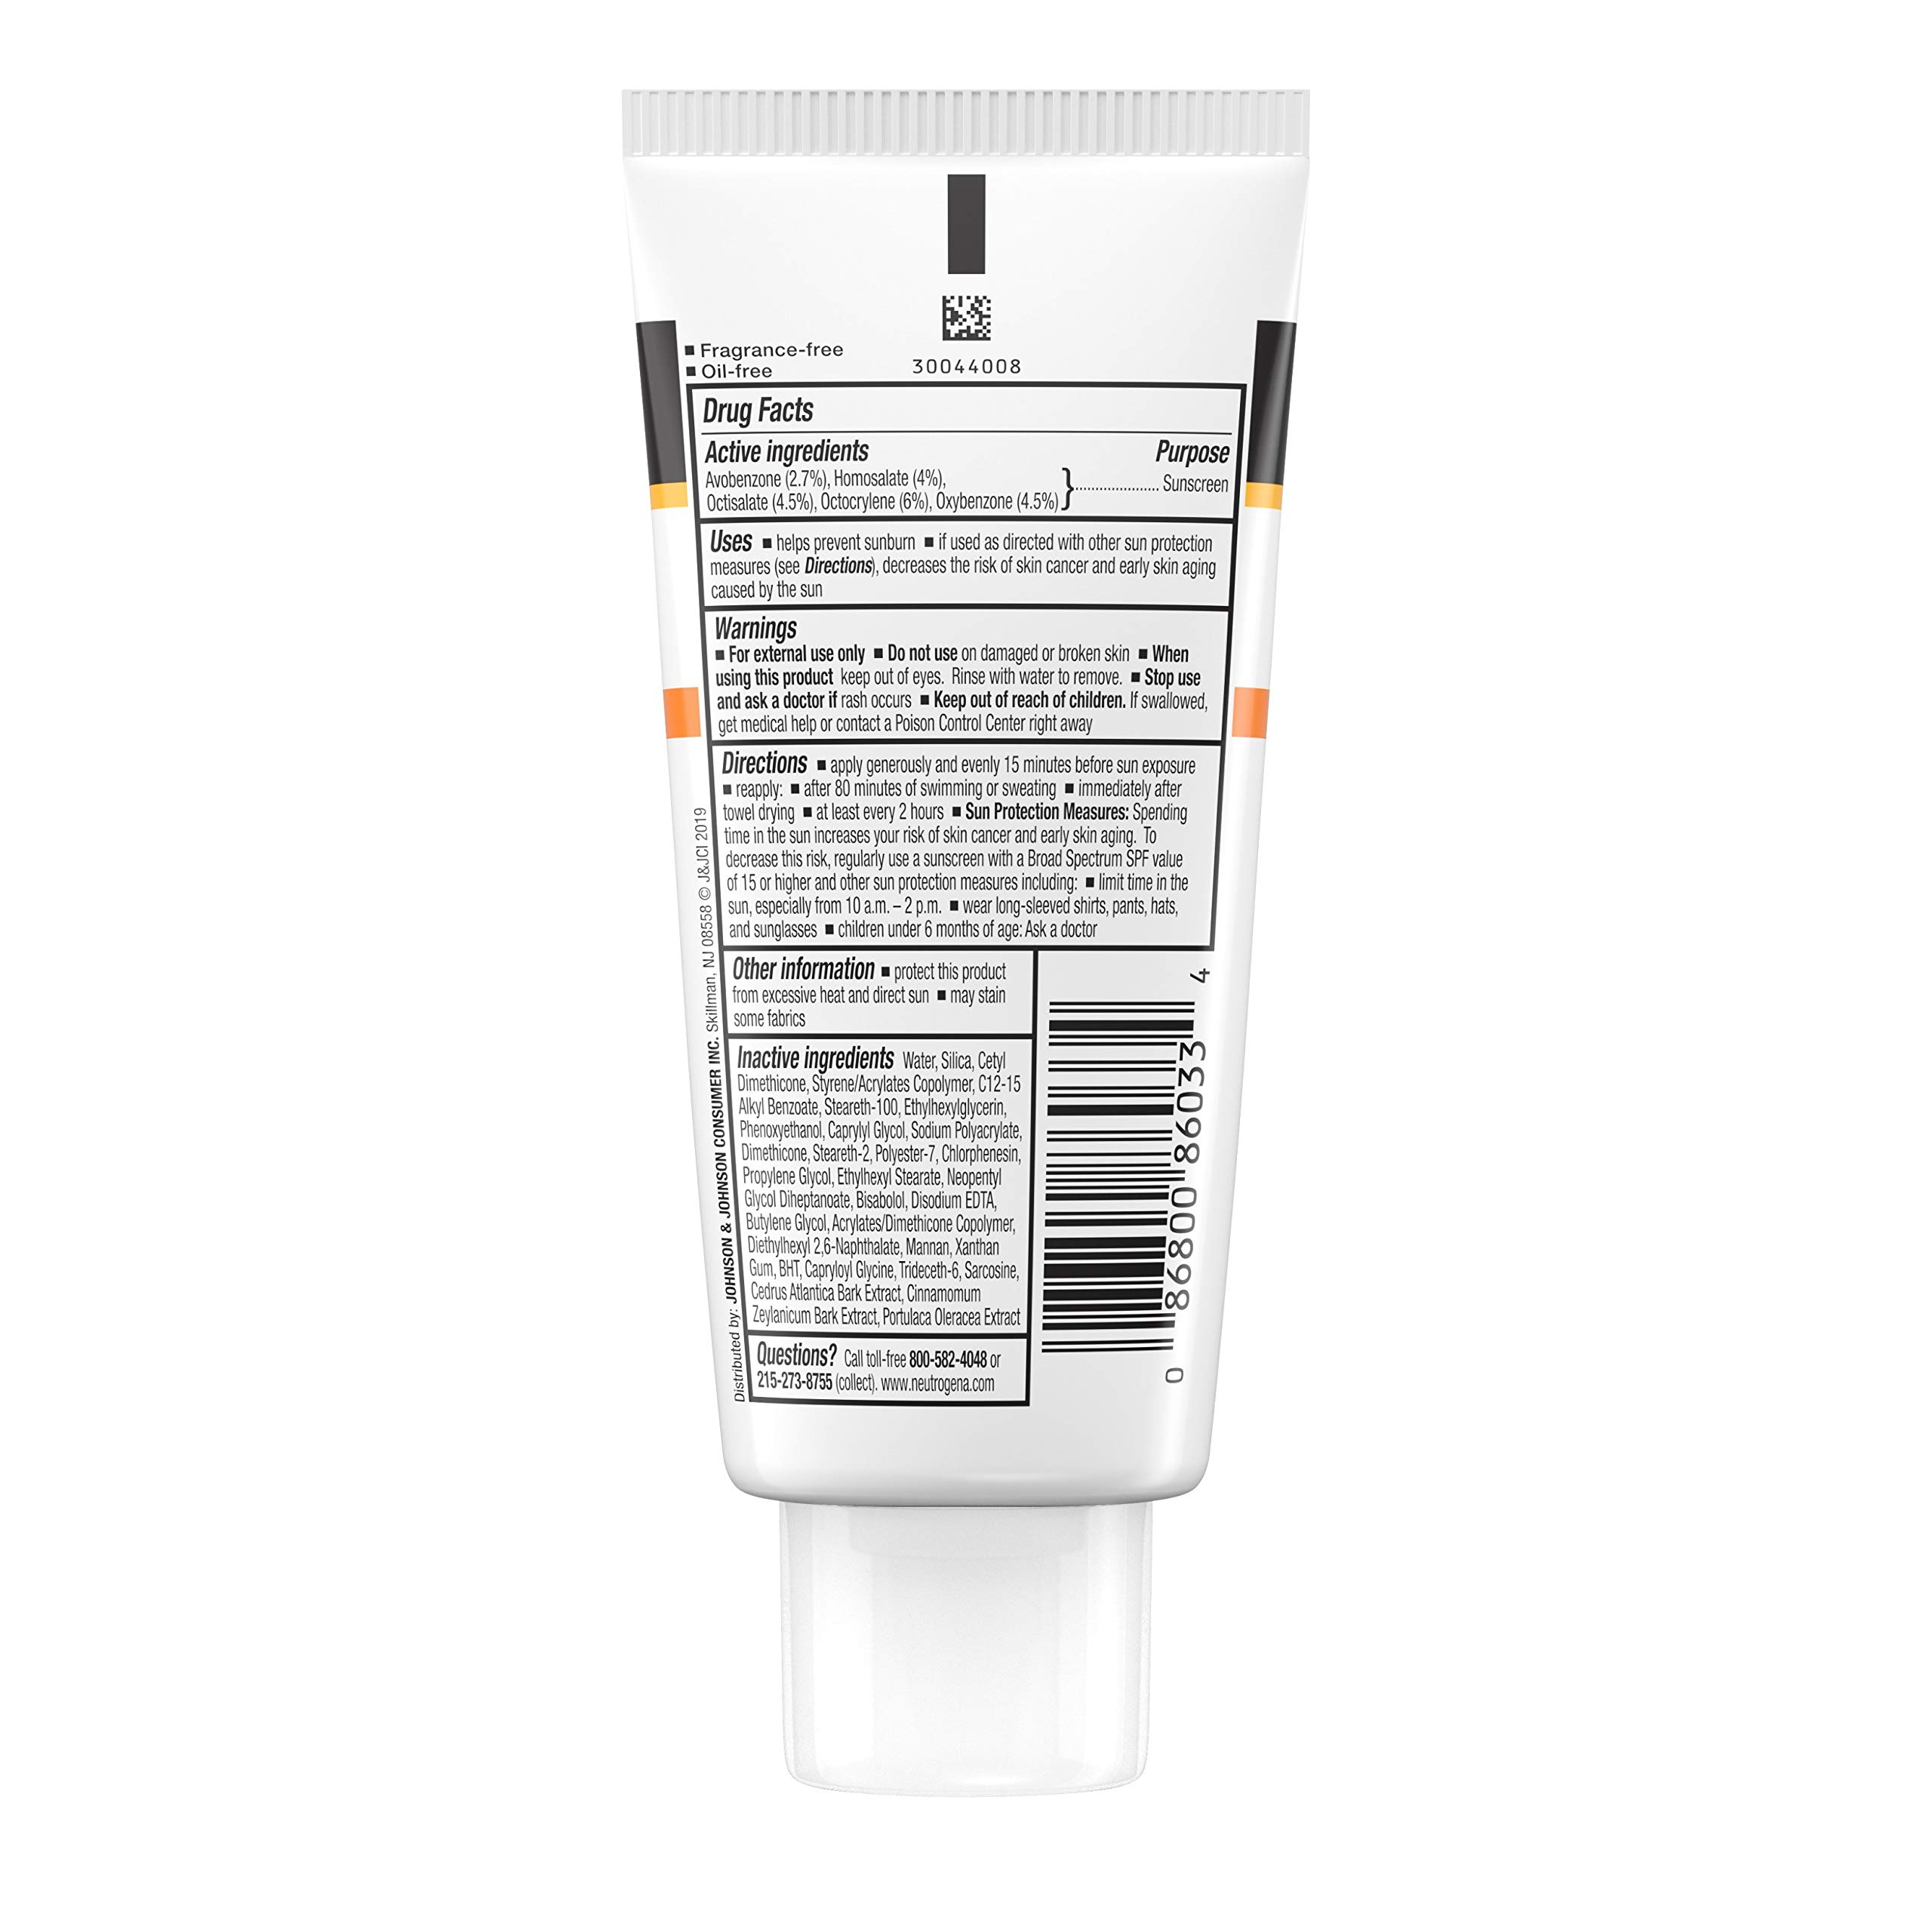 Neutrogena Clear Face Liquid Lotion Sunscreen for Acne-Prone Skin, Broad Spectrum SPF 55 with Helioplex Technology, Oil-Free, Fragrance-Free & Non-Comedogenic Facial Sunscreen, 3 fl. oz